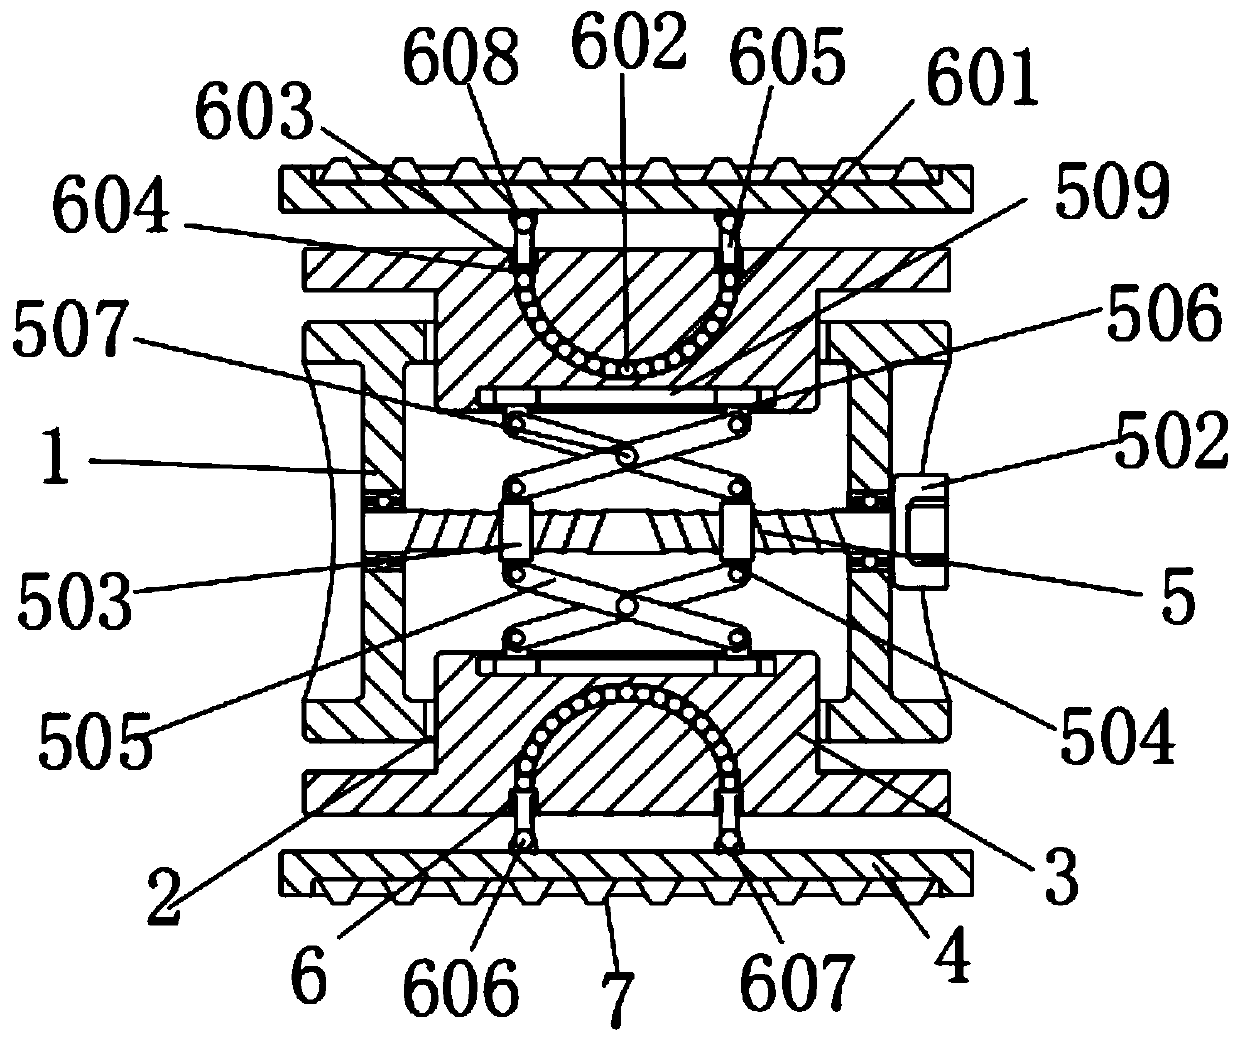 Interbody fusion device with four unfoldable sides